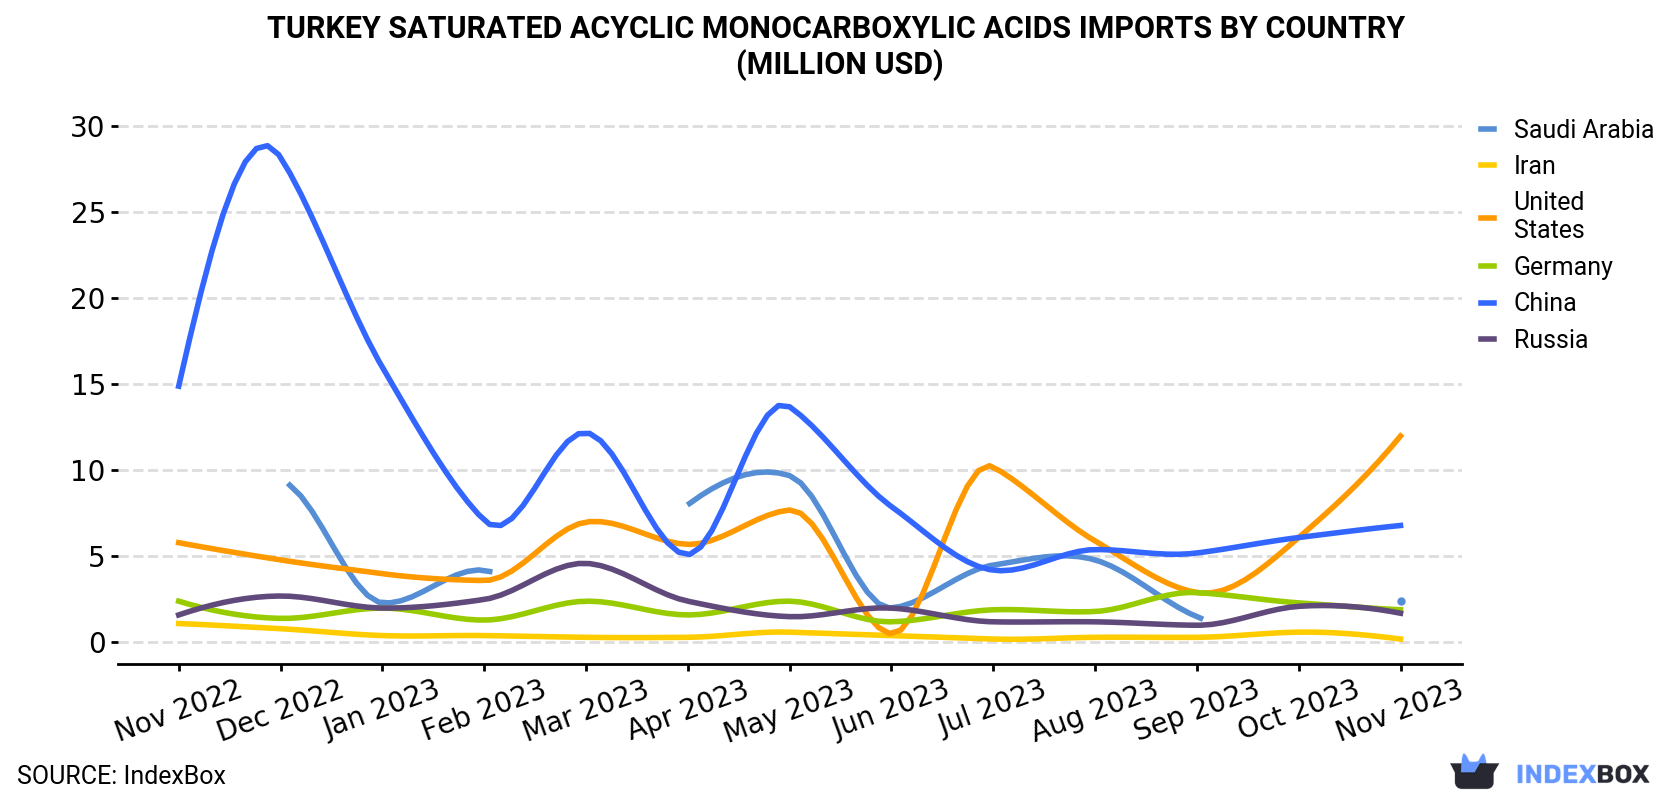 Turkey Saturated Acyclic Monocarboxylic Acids Imports By Country (Million USD)